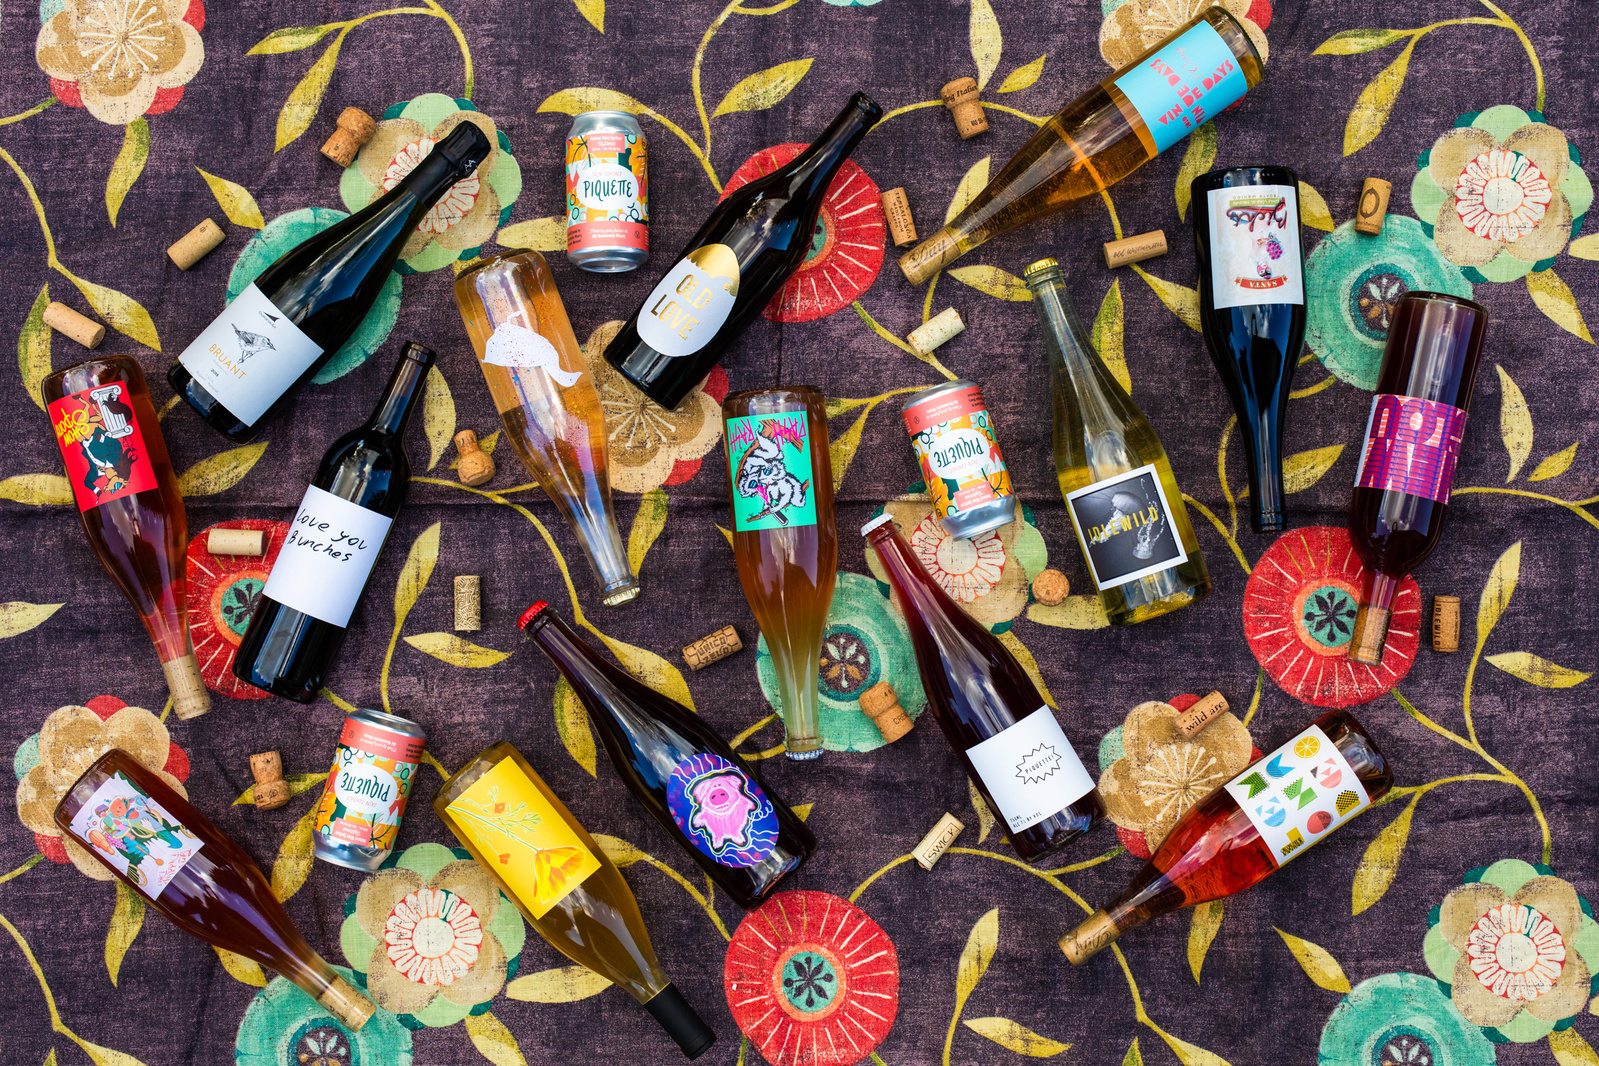 Overhead view of natural wine bottles scattered on a colorful fabric. 